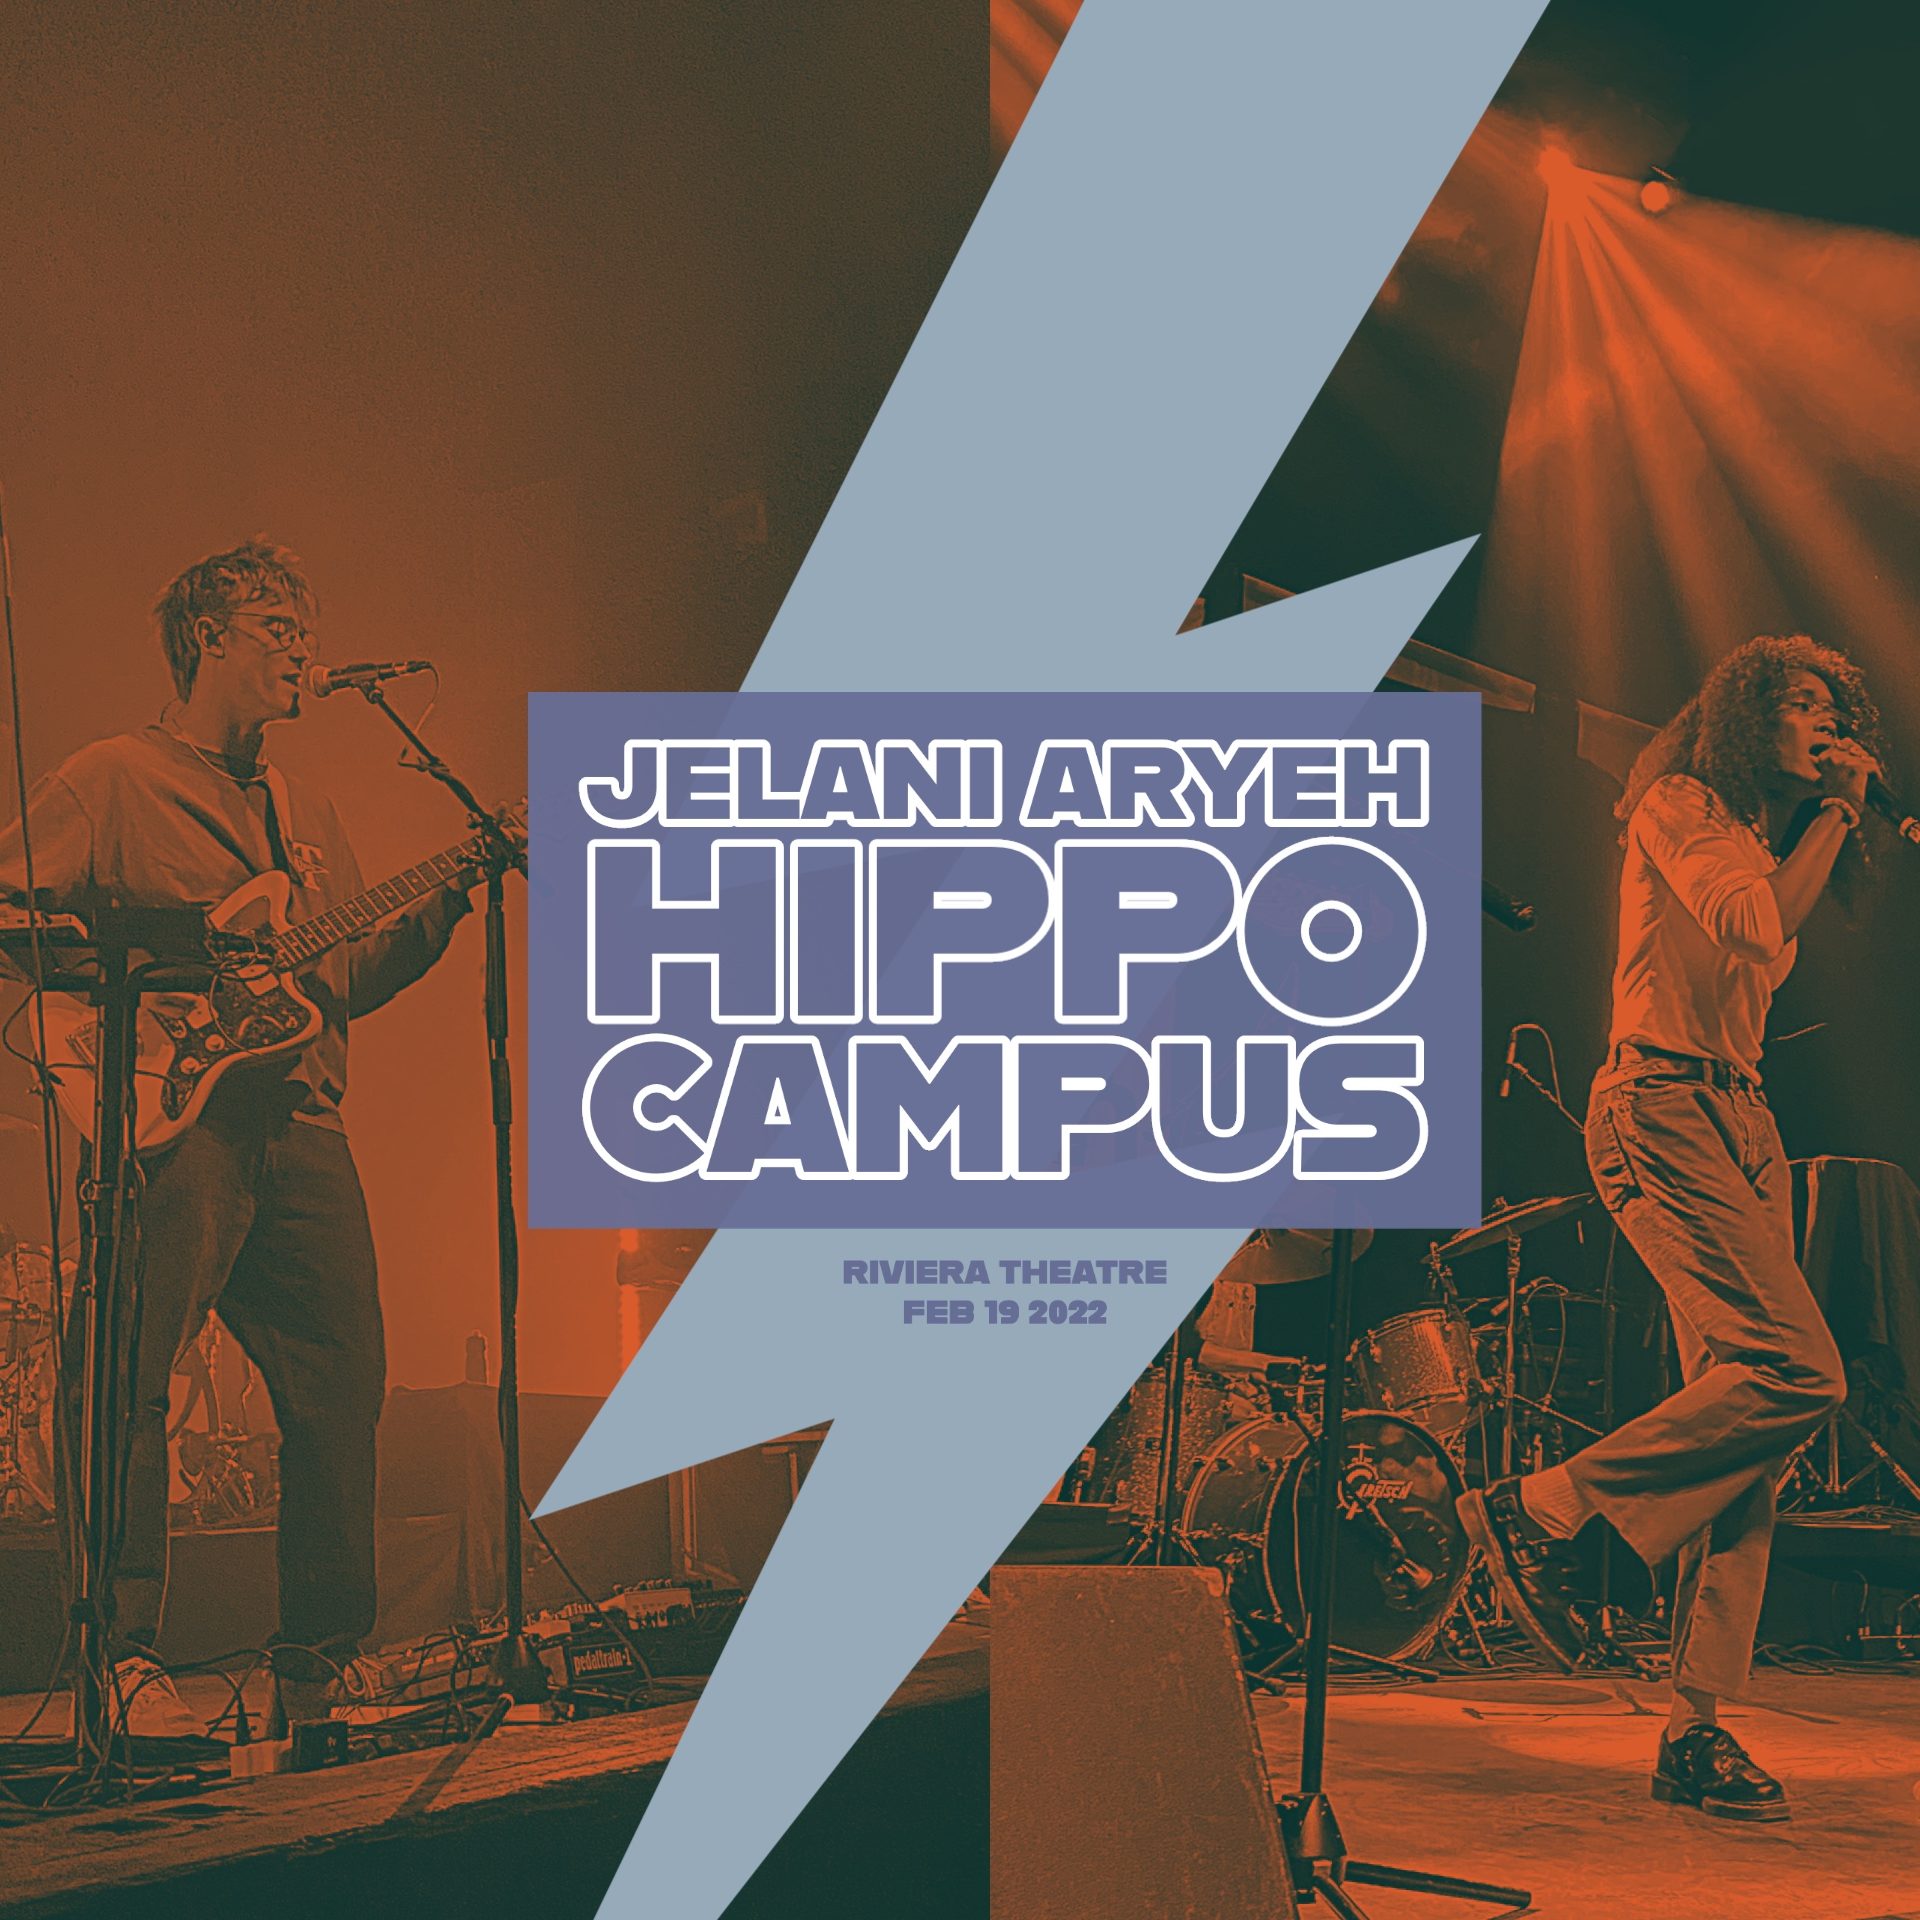 Hippo Campus and Jelani Aryeh